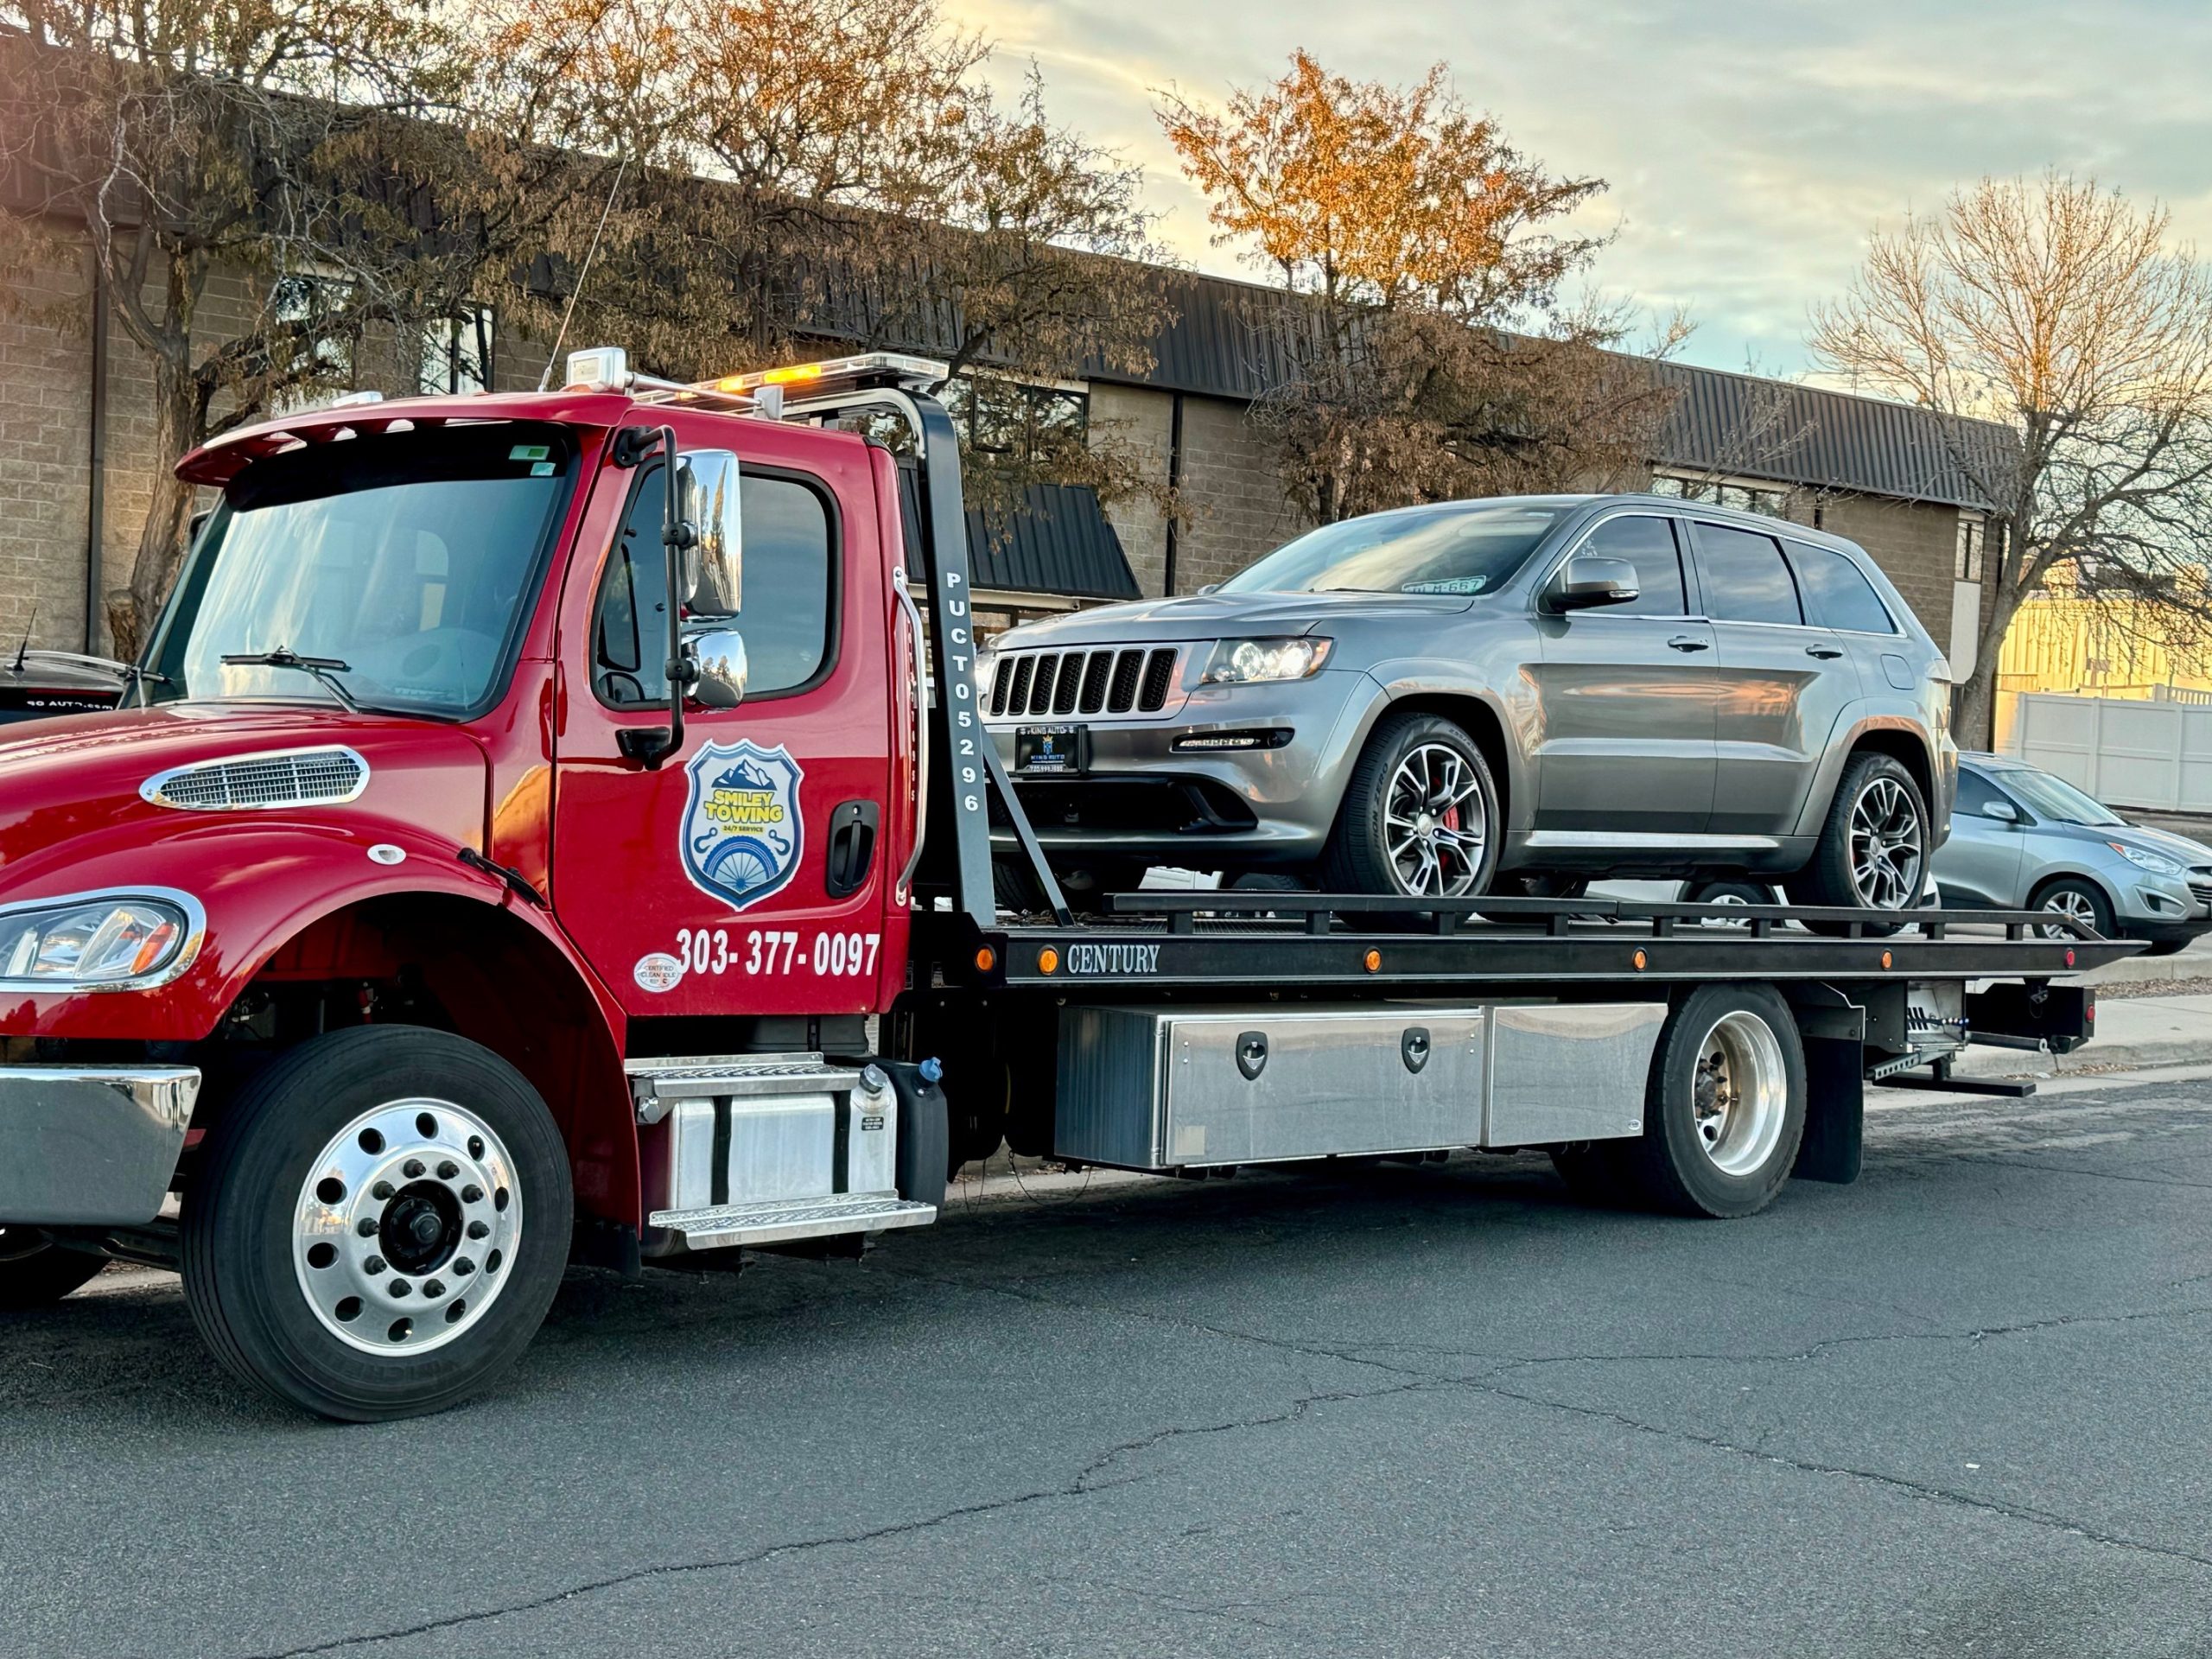 this image shows towing services in Highlands Ranch, CO